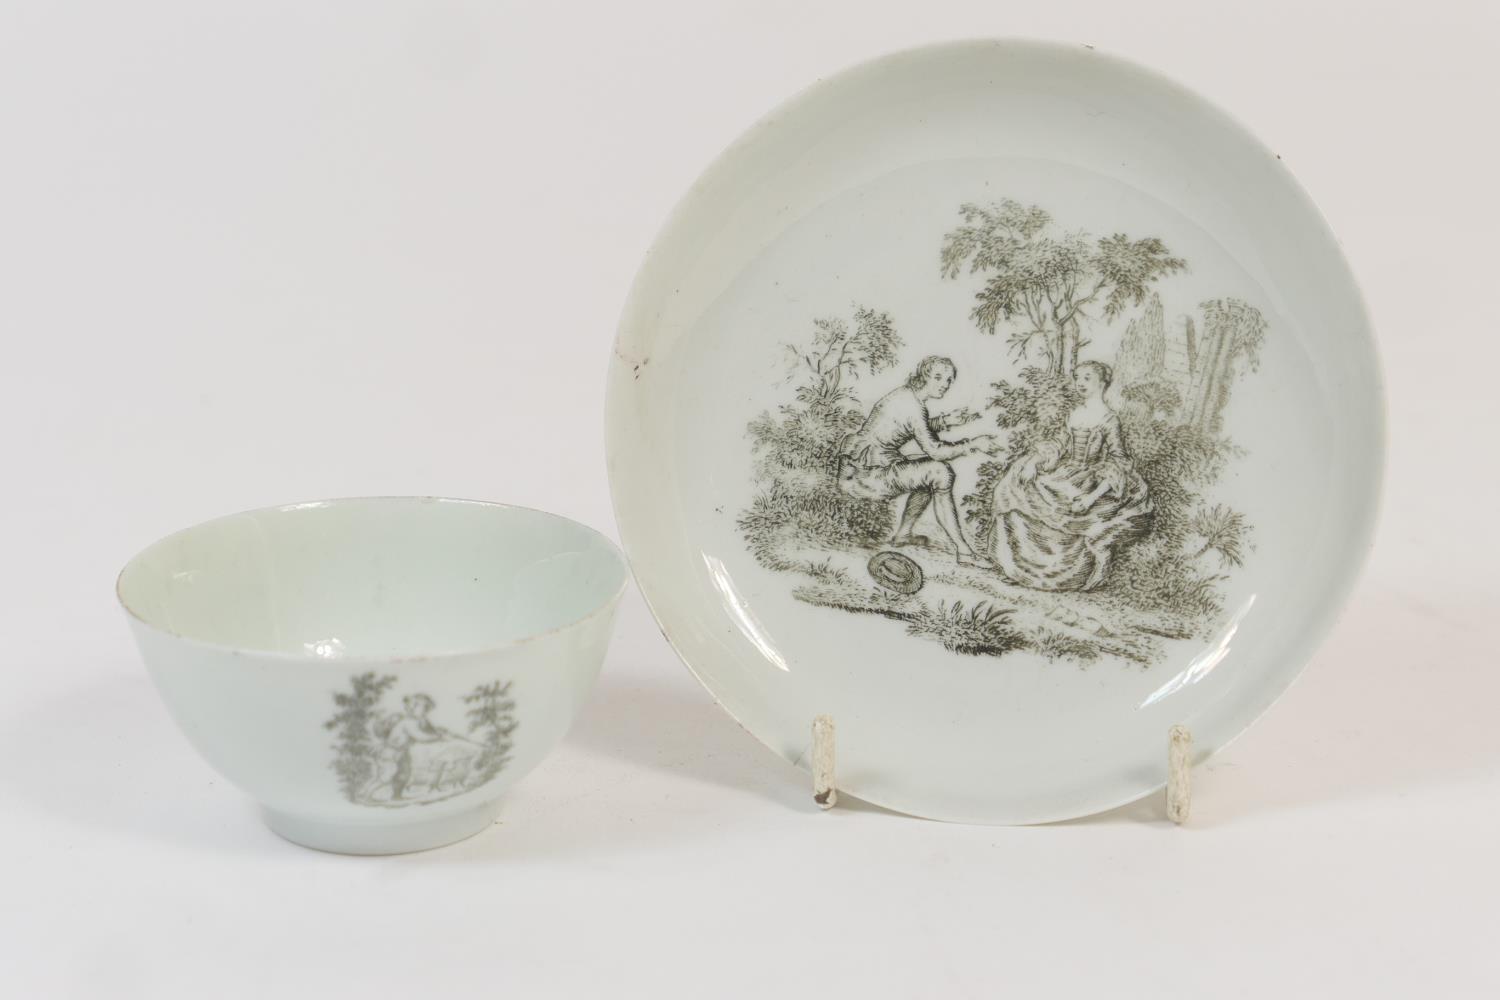 Christian (Liverpool) tea bowl and saucer, circa 1765-8, decorated with a monochrome print titled '